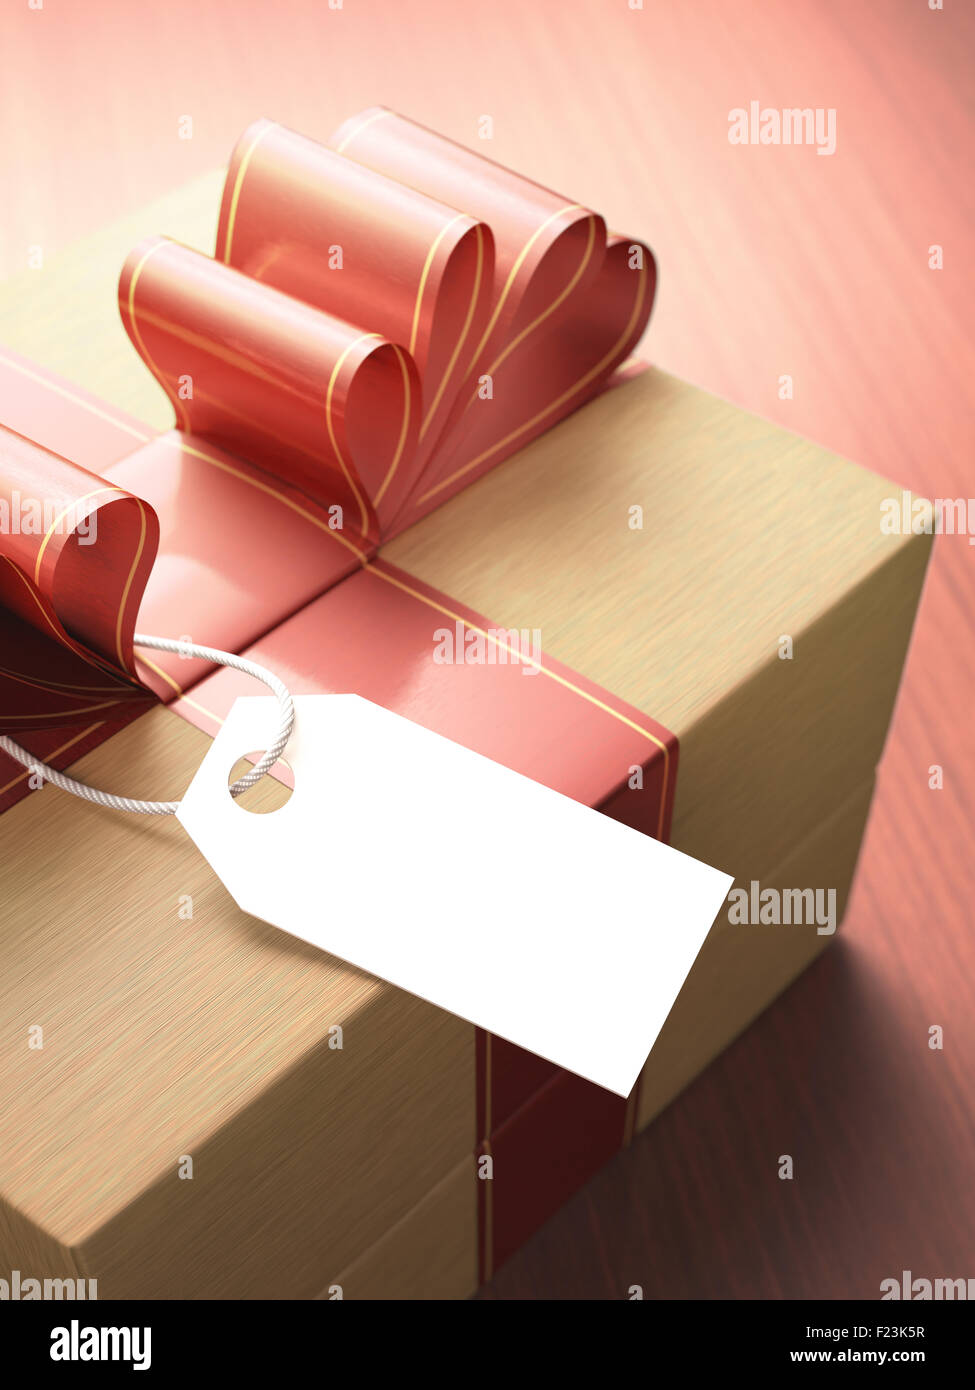 Gift with red ribbon and a blank card waiting for your message. Depth of field with focus on the card. Clipping path included. Stock Photo